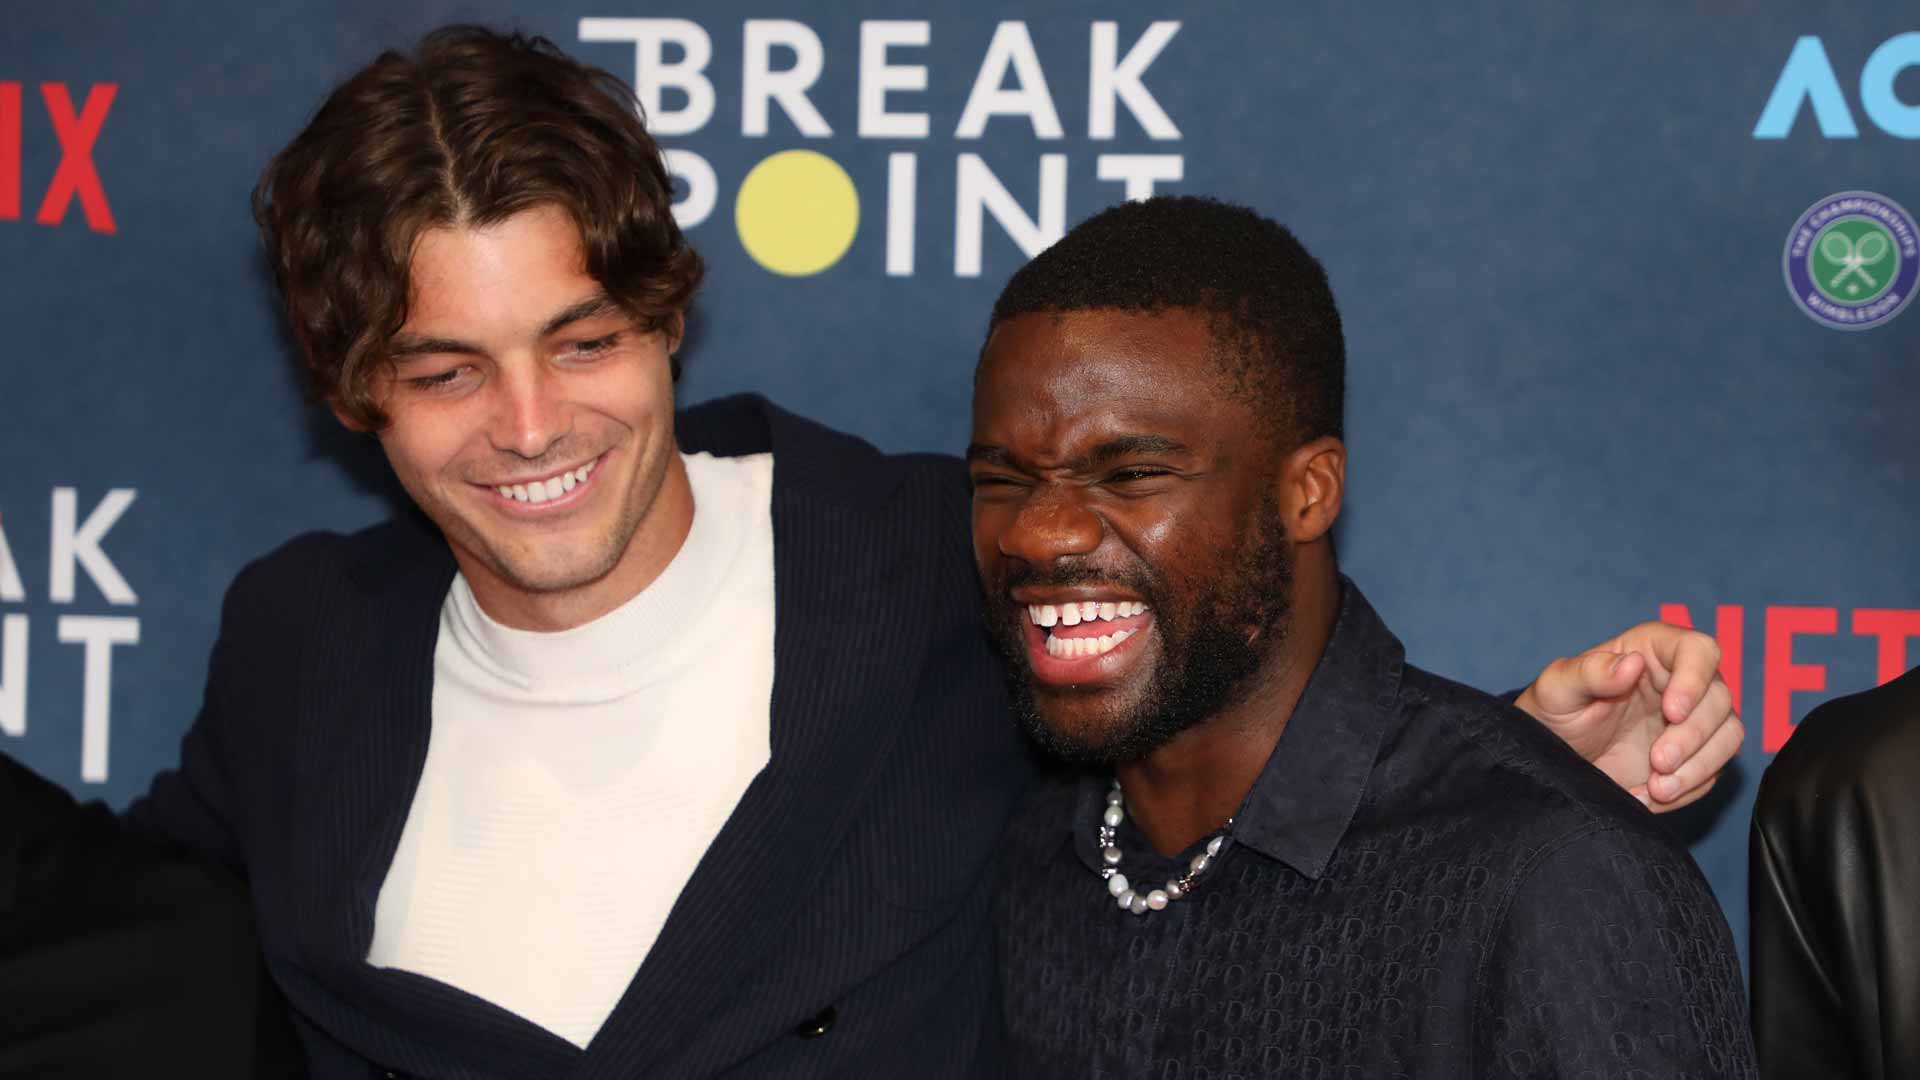 Taylor Fritz and Frances Tiafoe are among the stars who will feature in Season 2 of Netflix's Break Point.